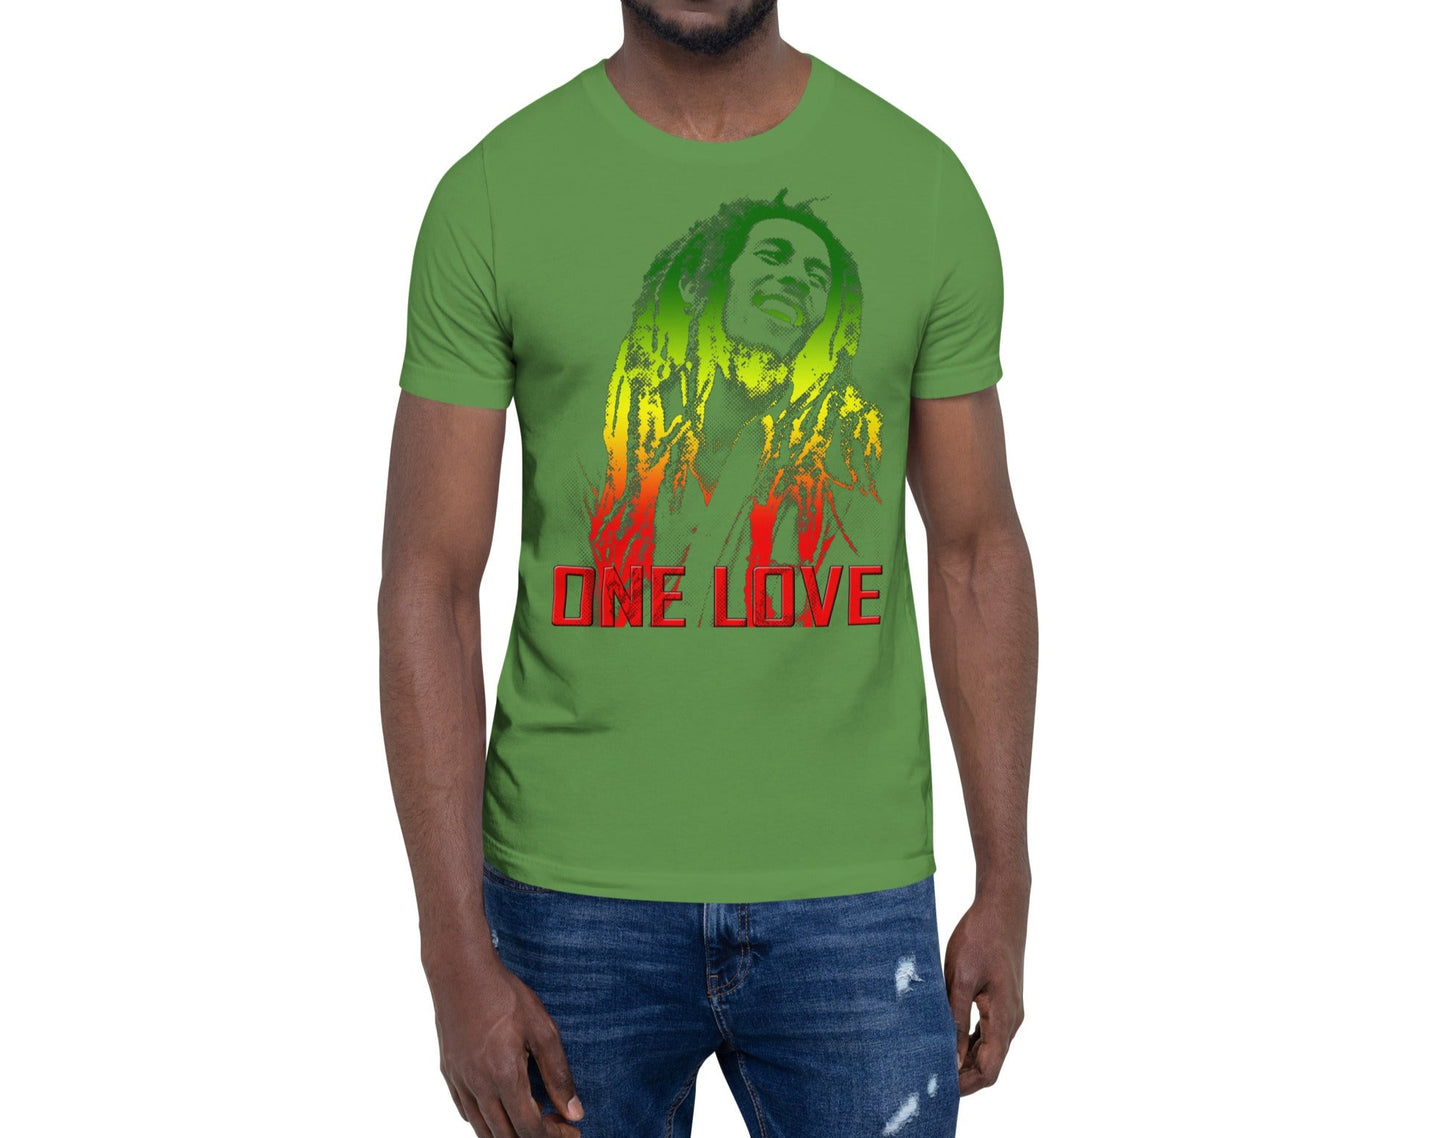 Express Your Love for Reggae